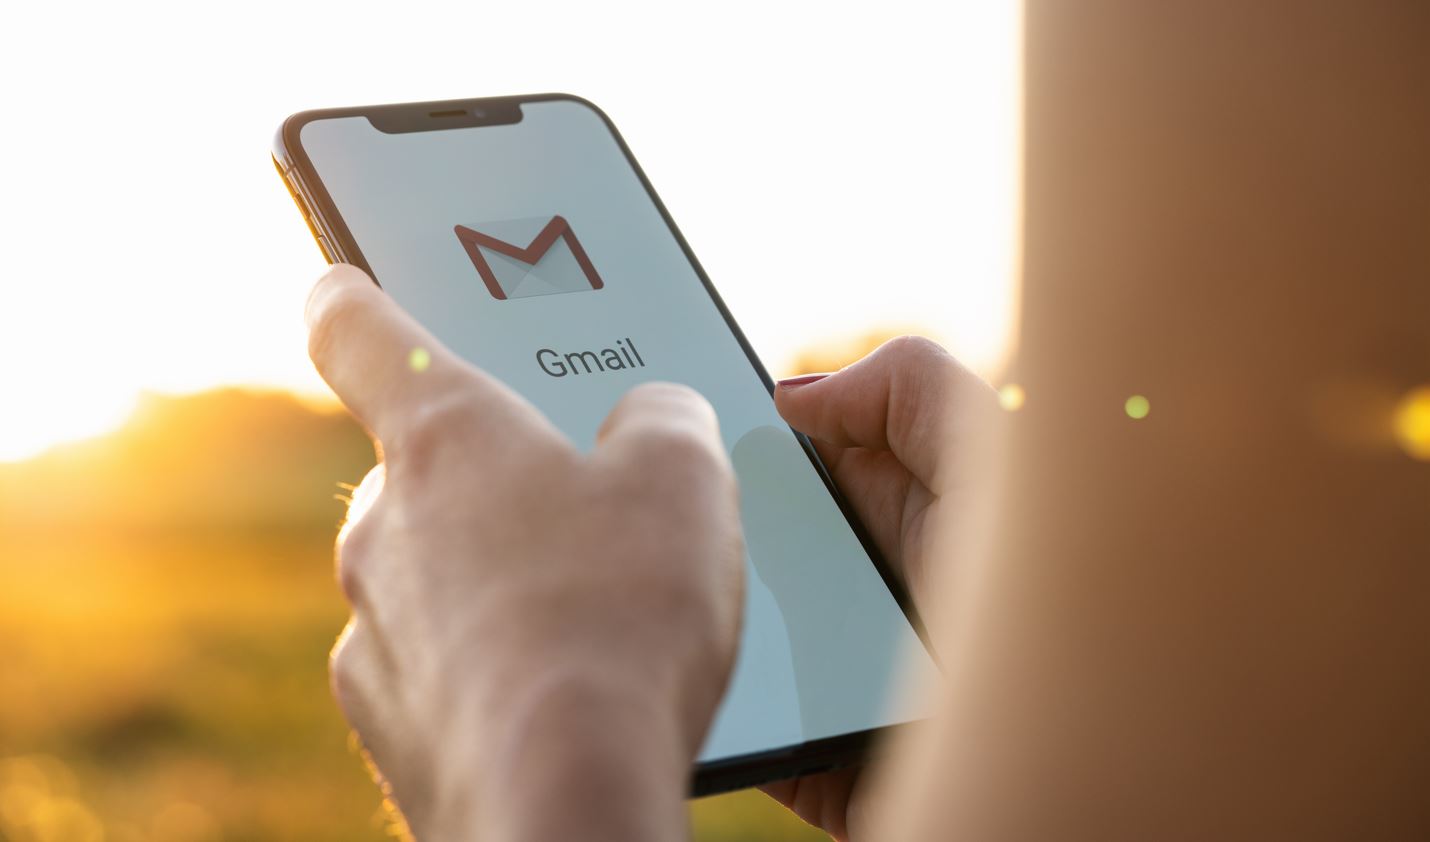 You no longer receive emails.  Gmail emails?  3 tips to free a blocked account